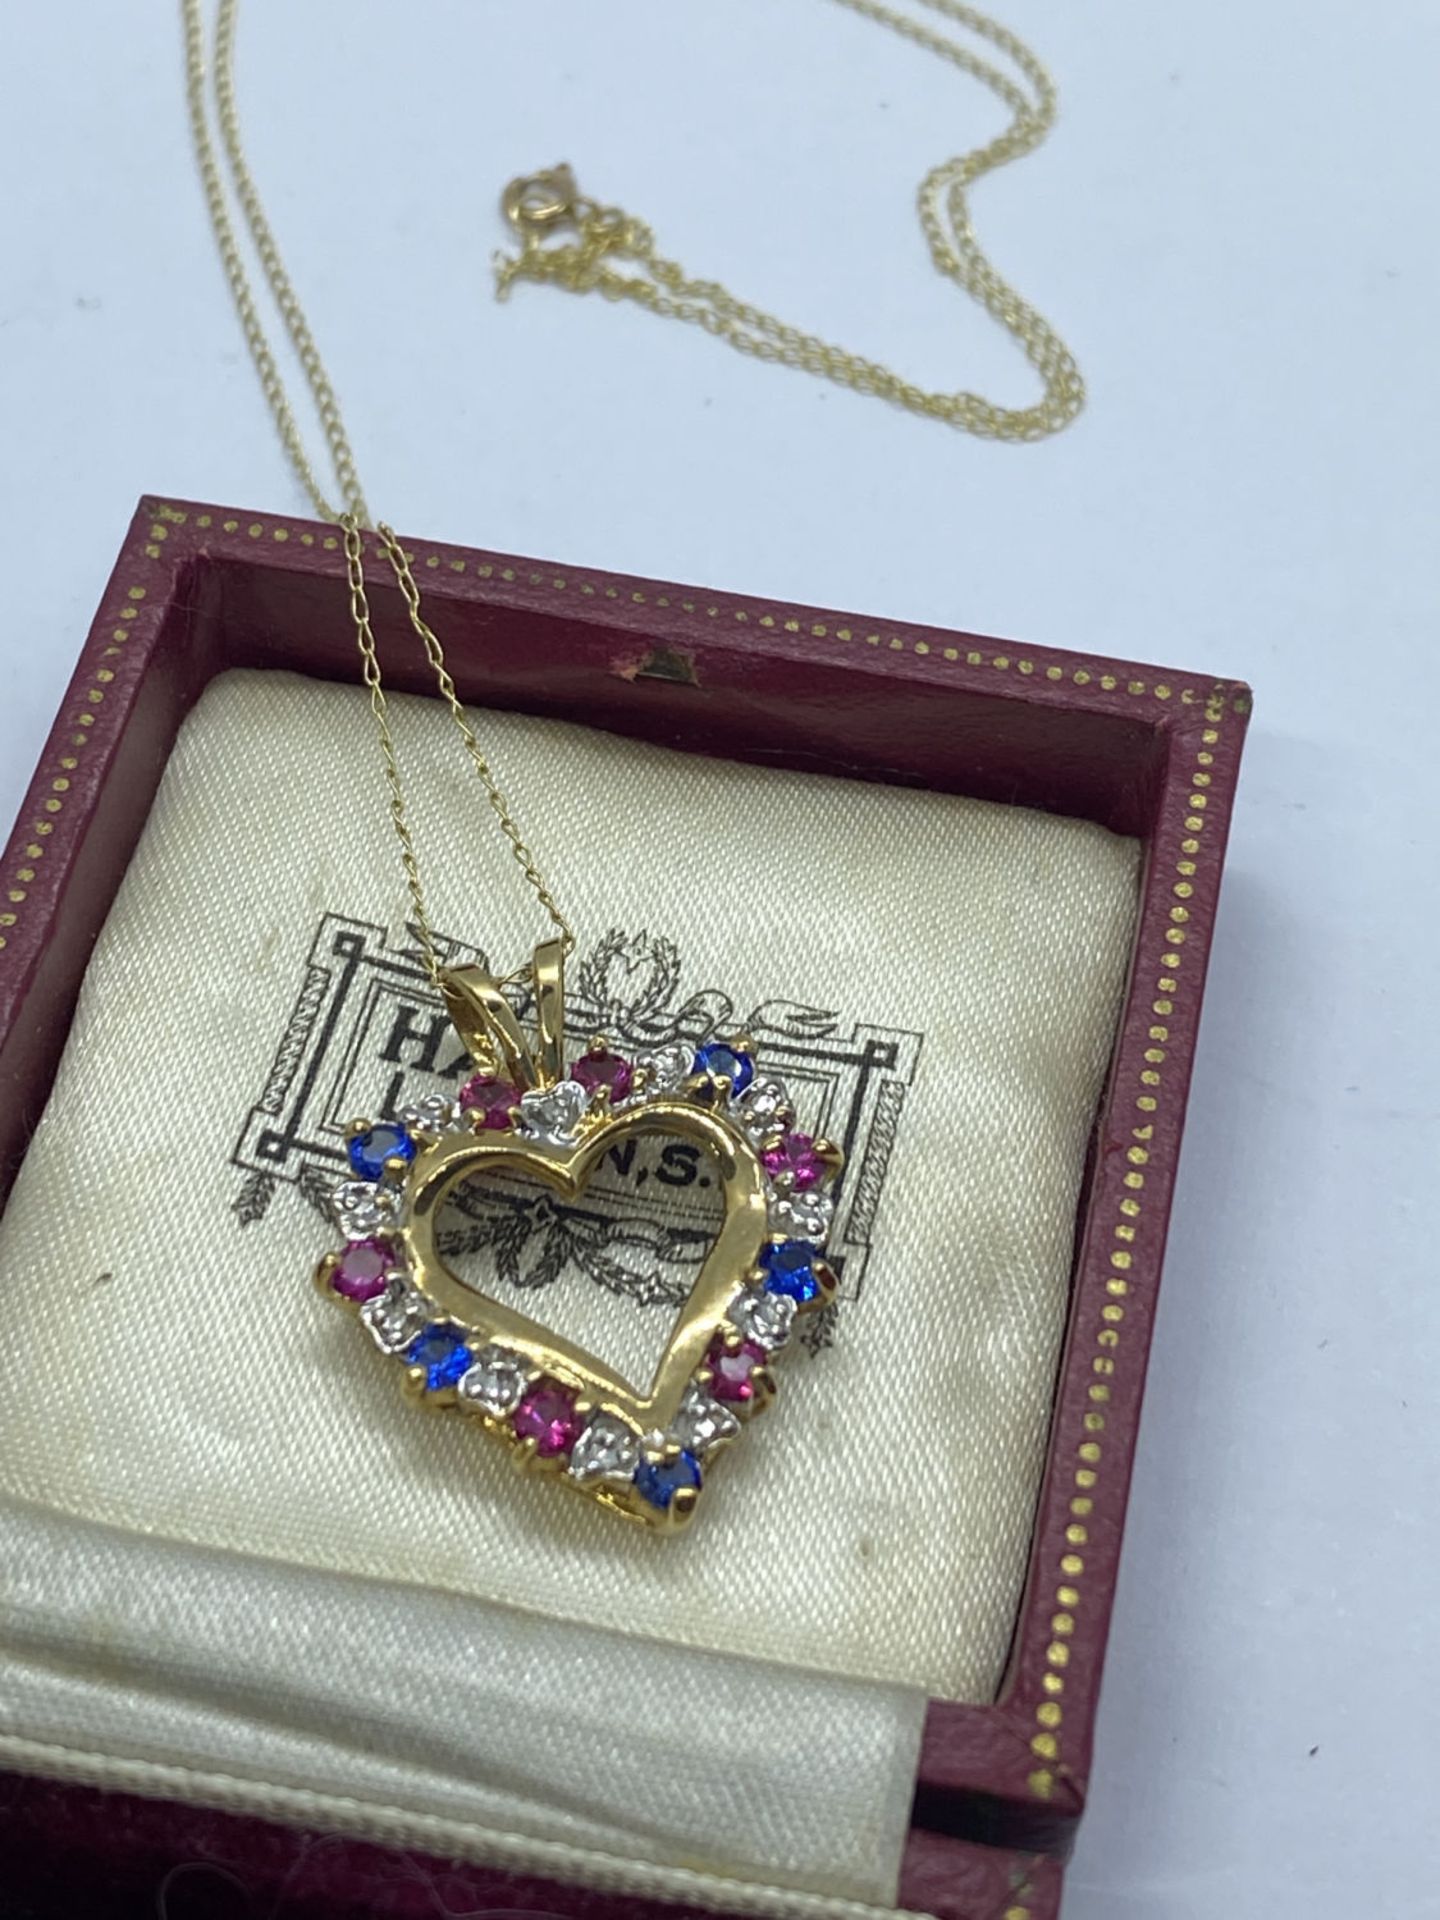 10ct GOLD PRETTY RED AND BLUE GEM SET HEART PENDANT 25mm x 20mm WITH APPROX. 18' CHAIN - Image 2 of 2